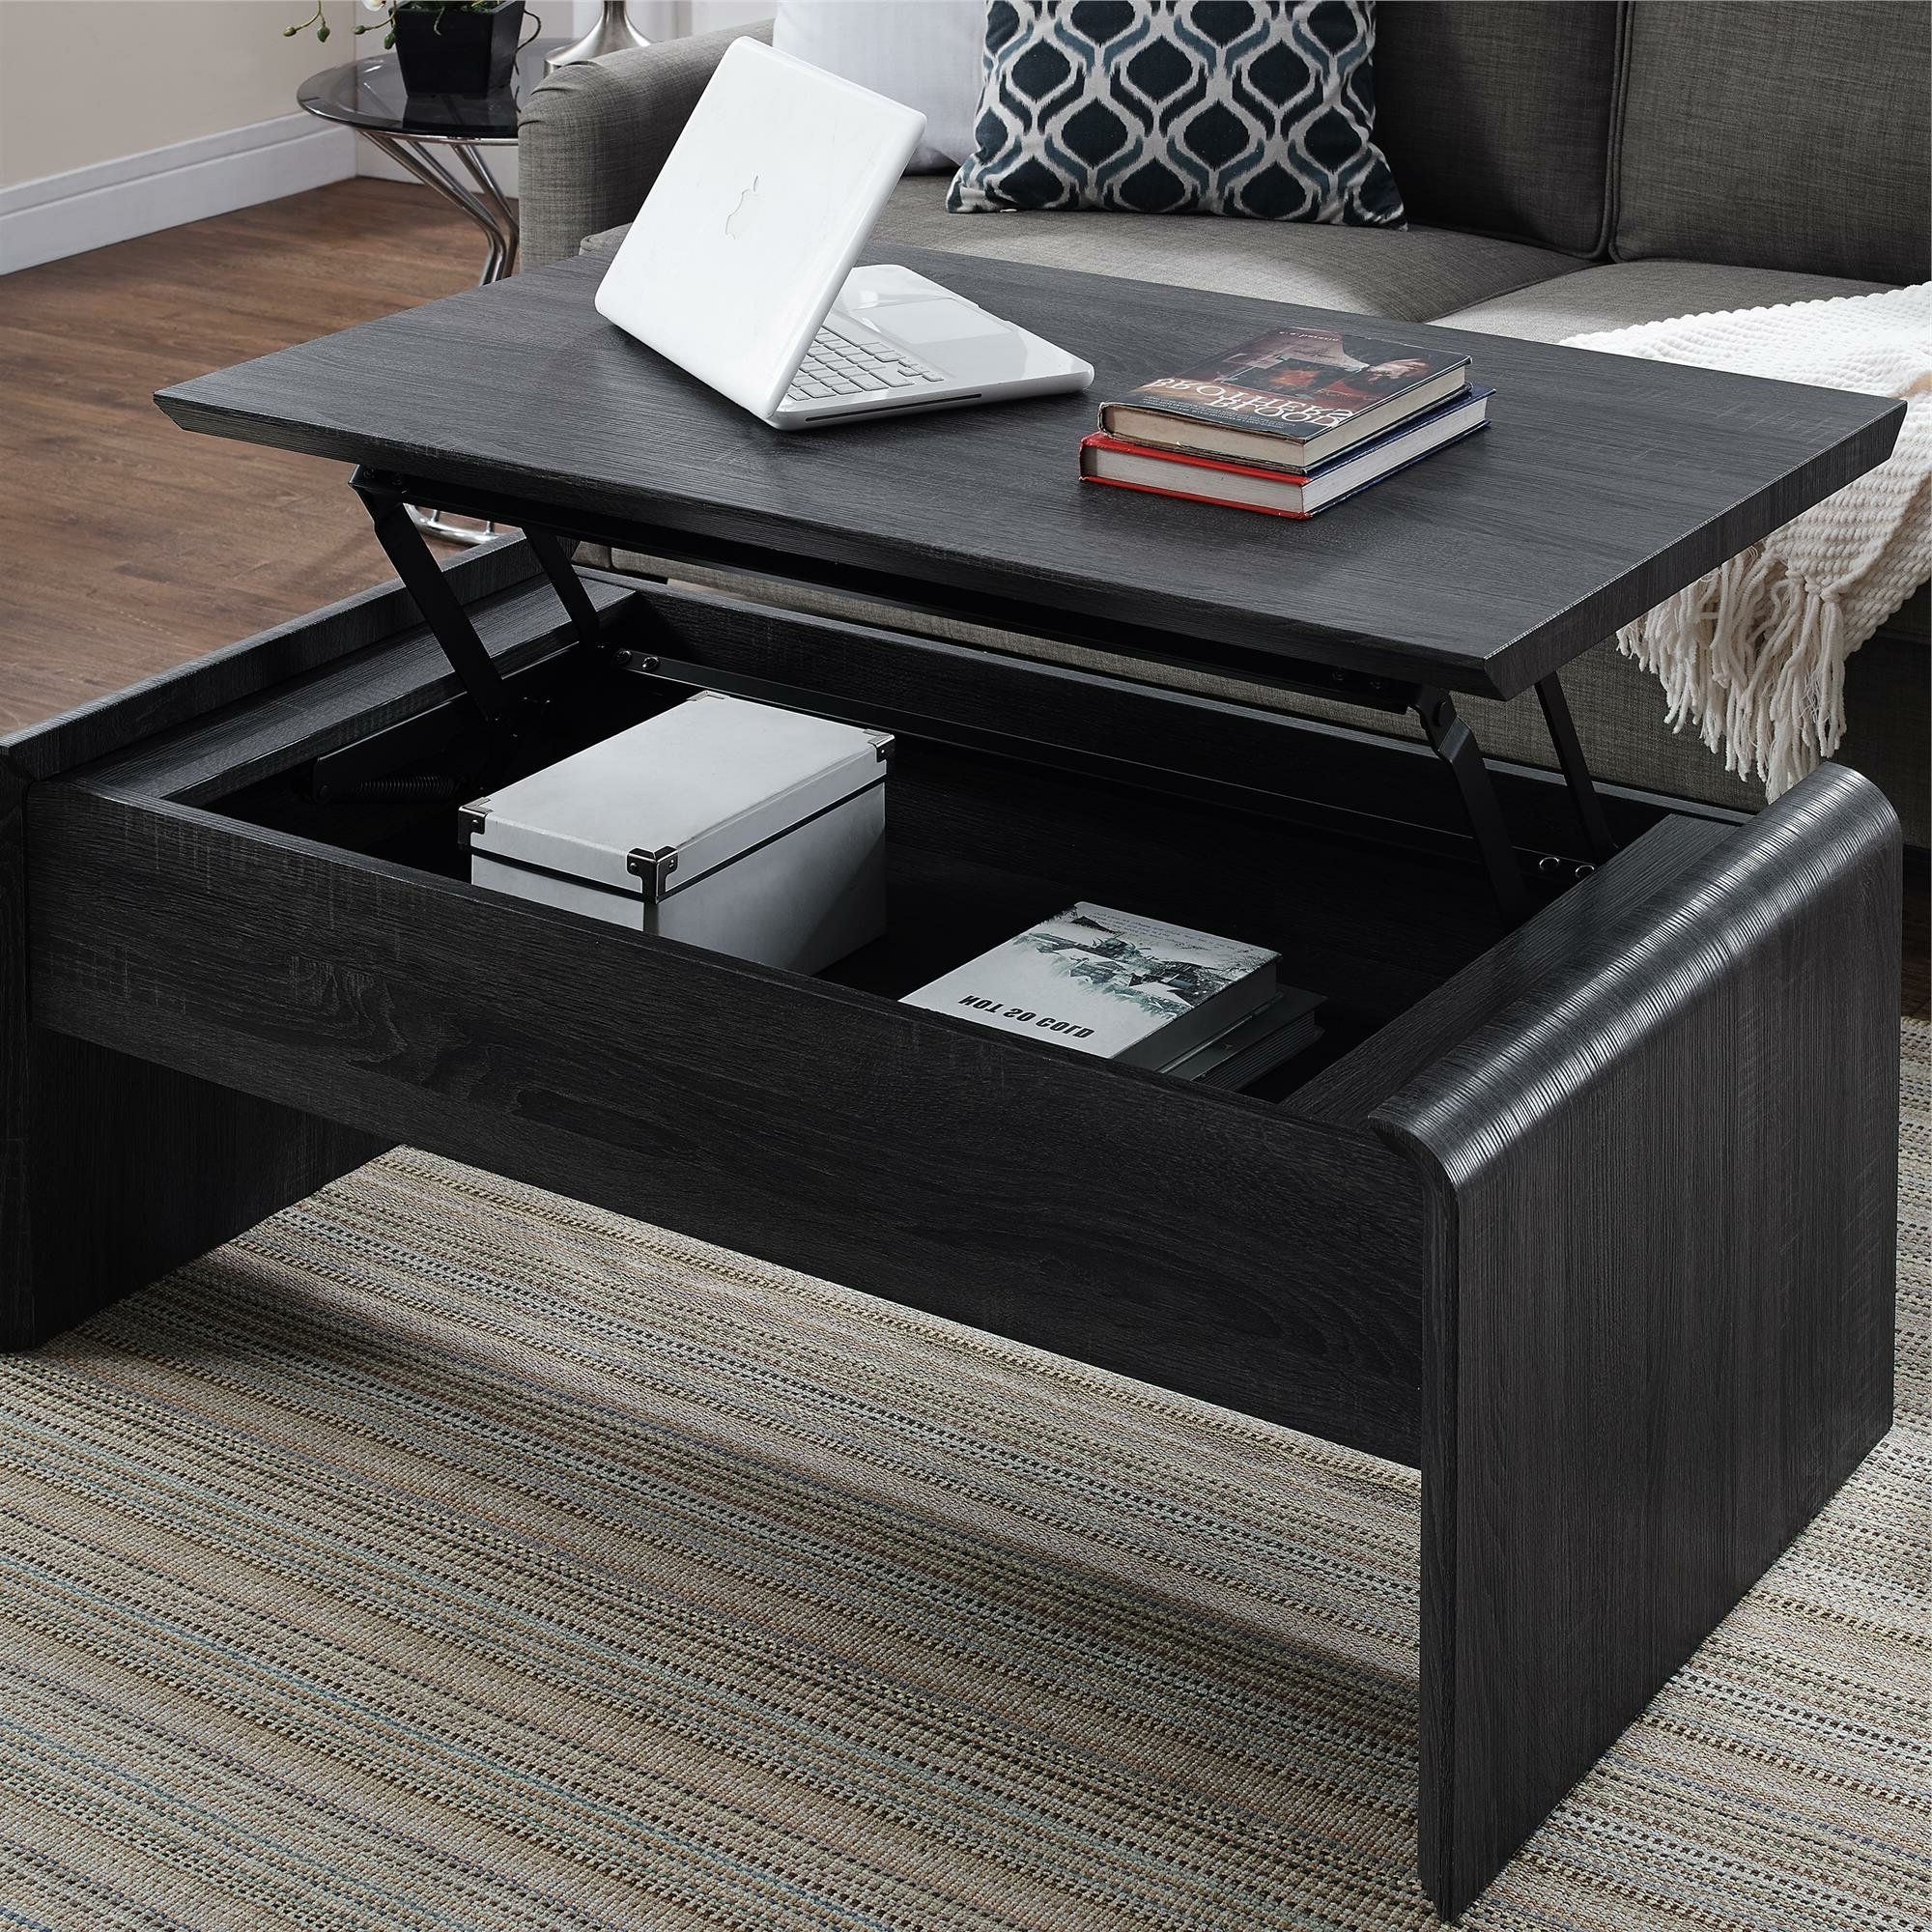 Widely Used Dorel Living Lift Top Coffee Table, Dark Grey & Reviews (View 13 of 15)